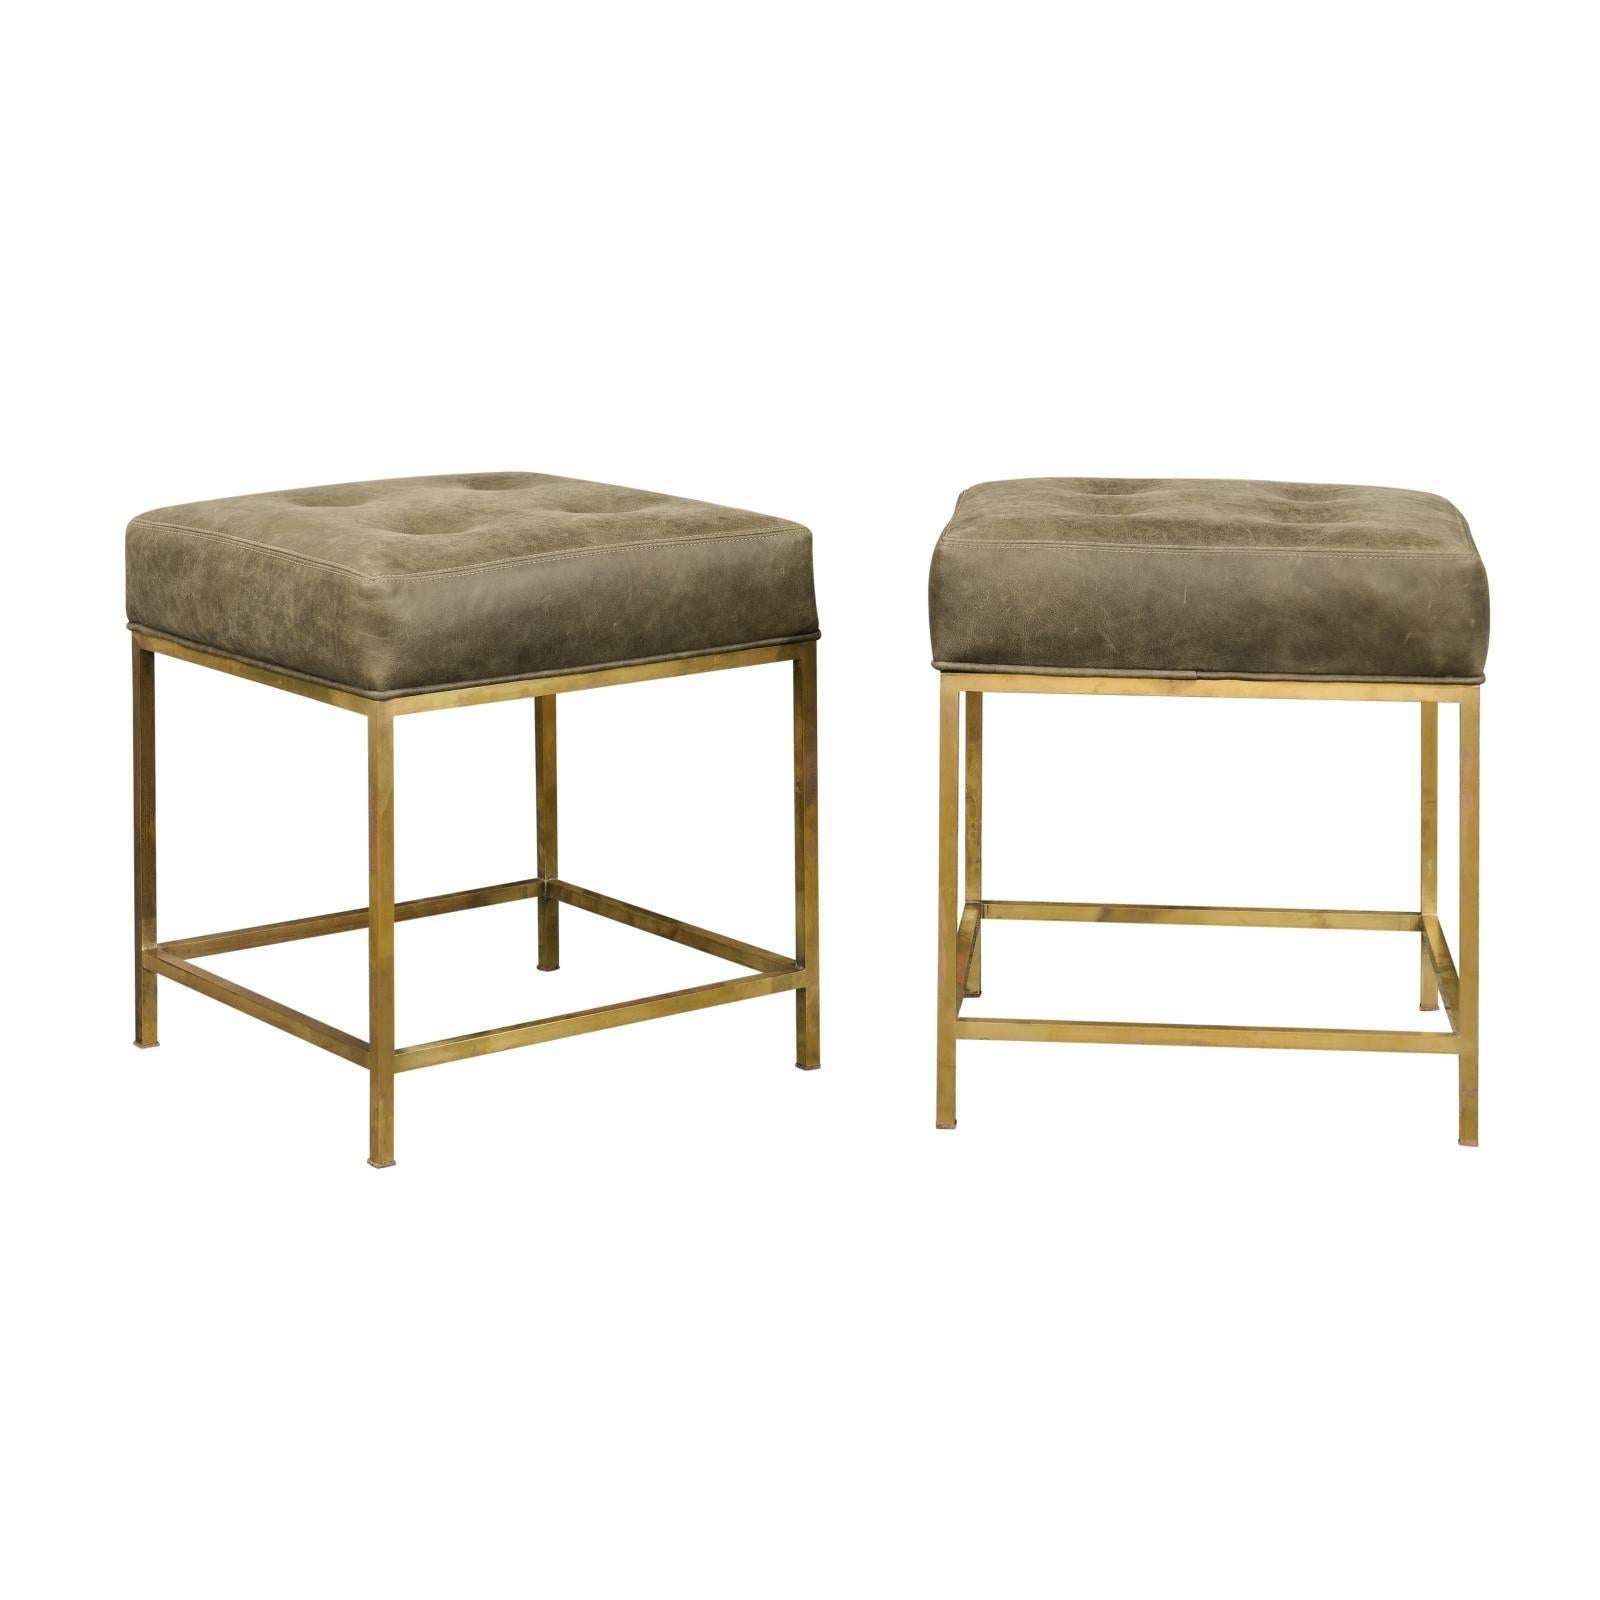 Pair of Vintage Italian 1960s Brass Stools with Green Tufted Leather Upholstery